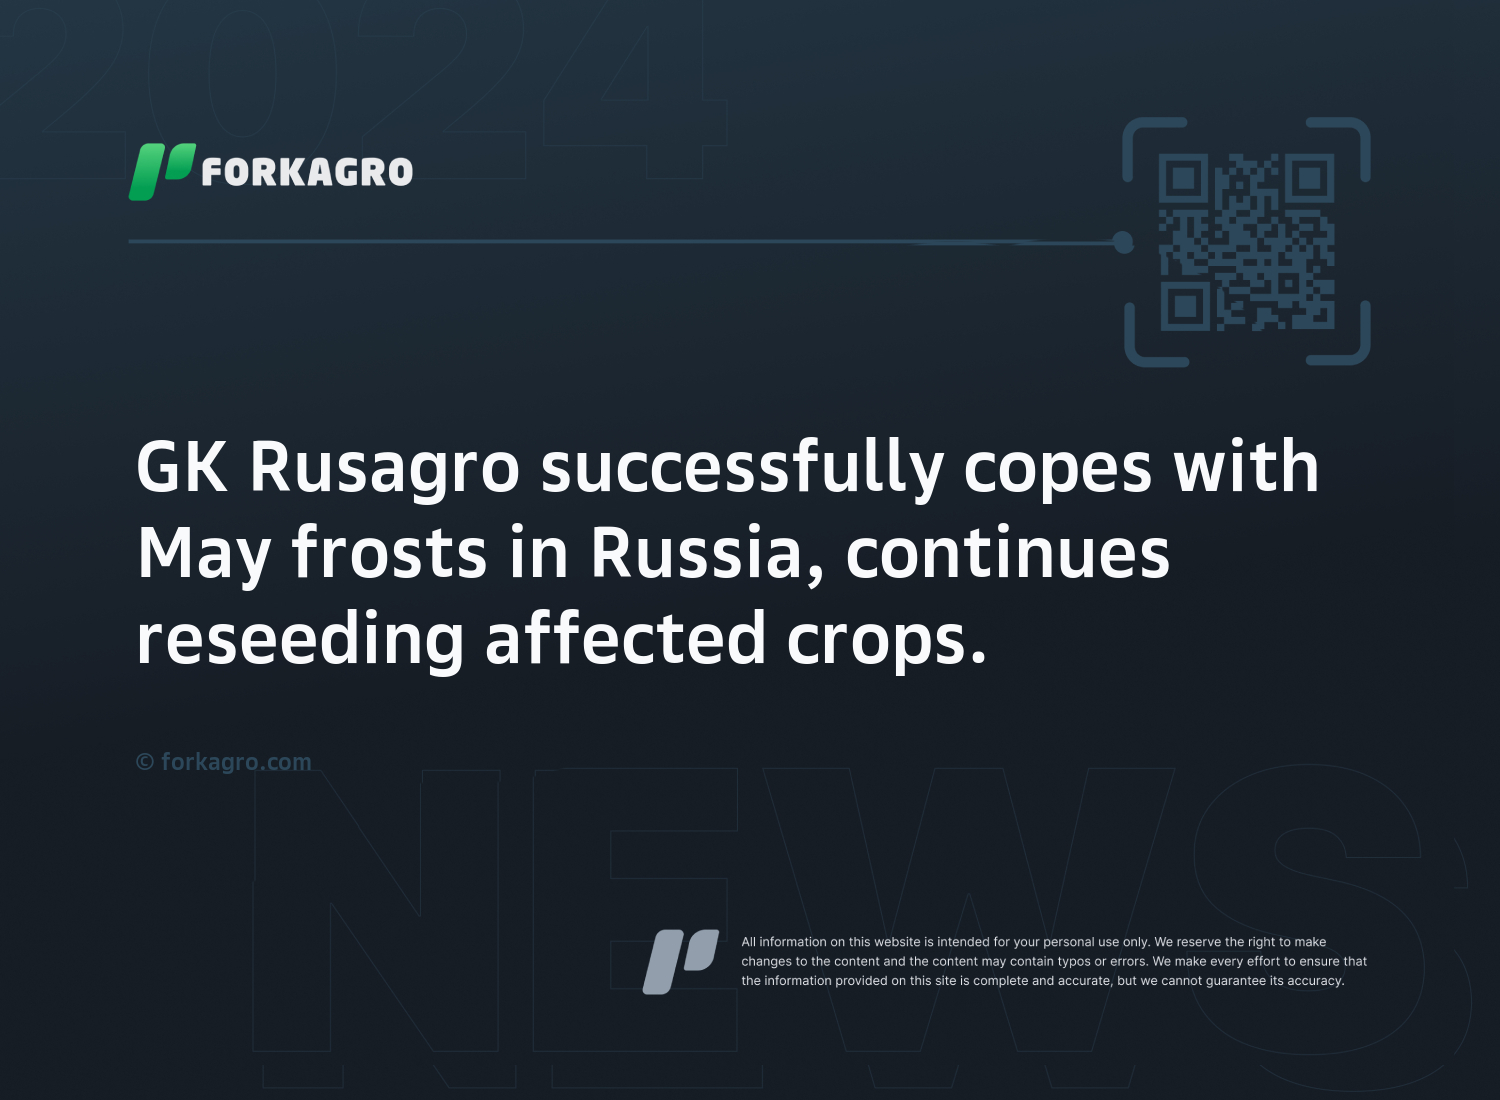 GK Rusagro successfully copes with May frosts in Russia, continues reseeding affected crops.